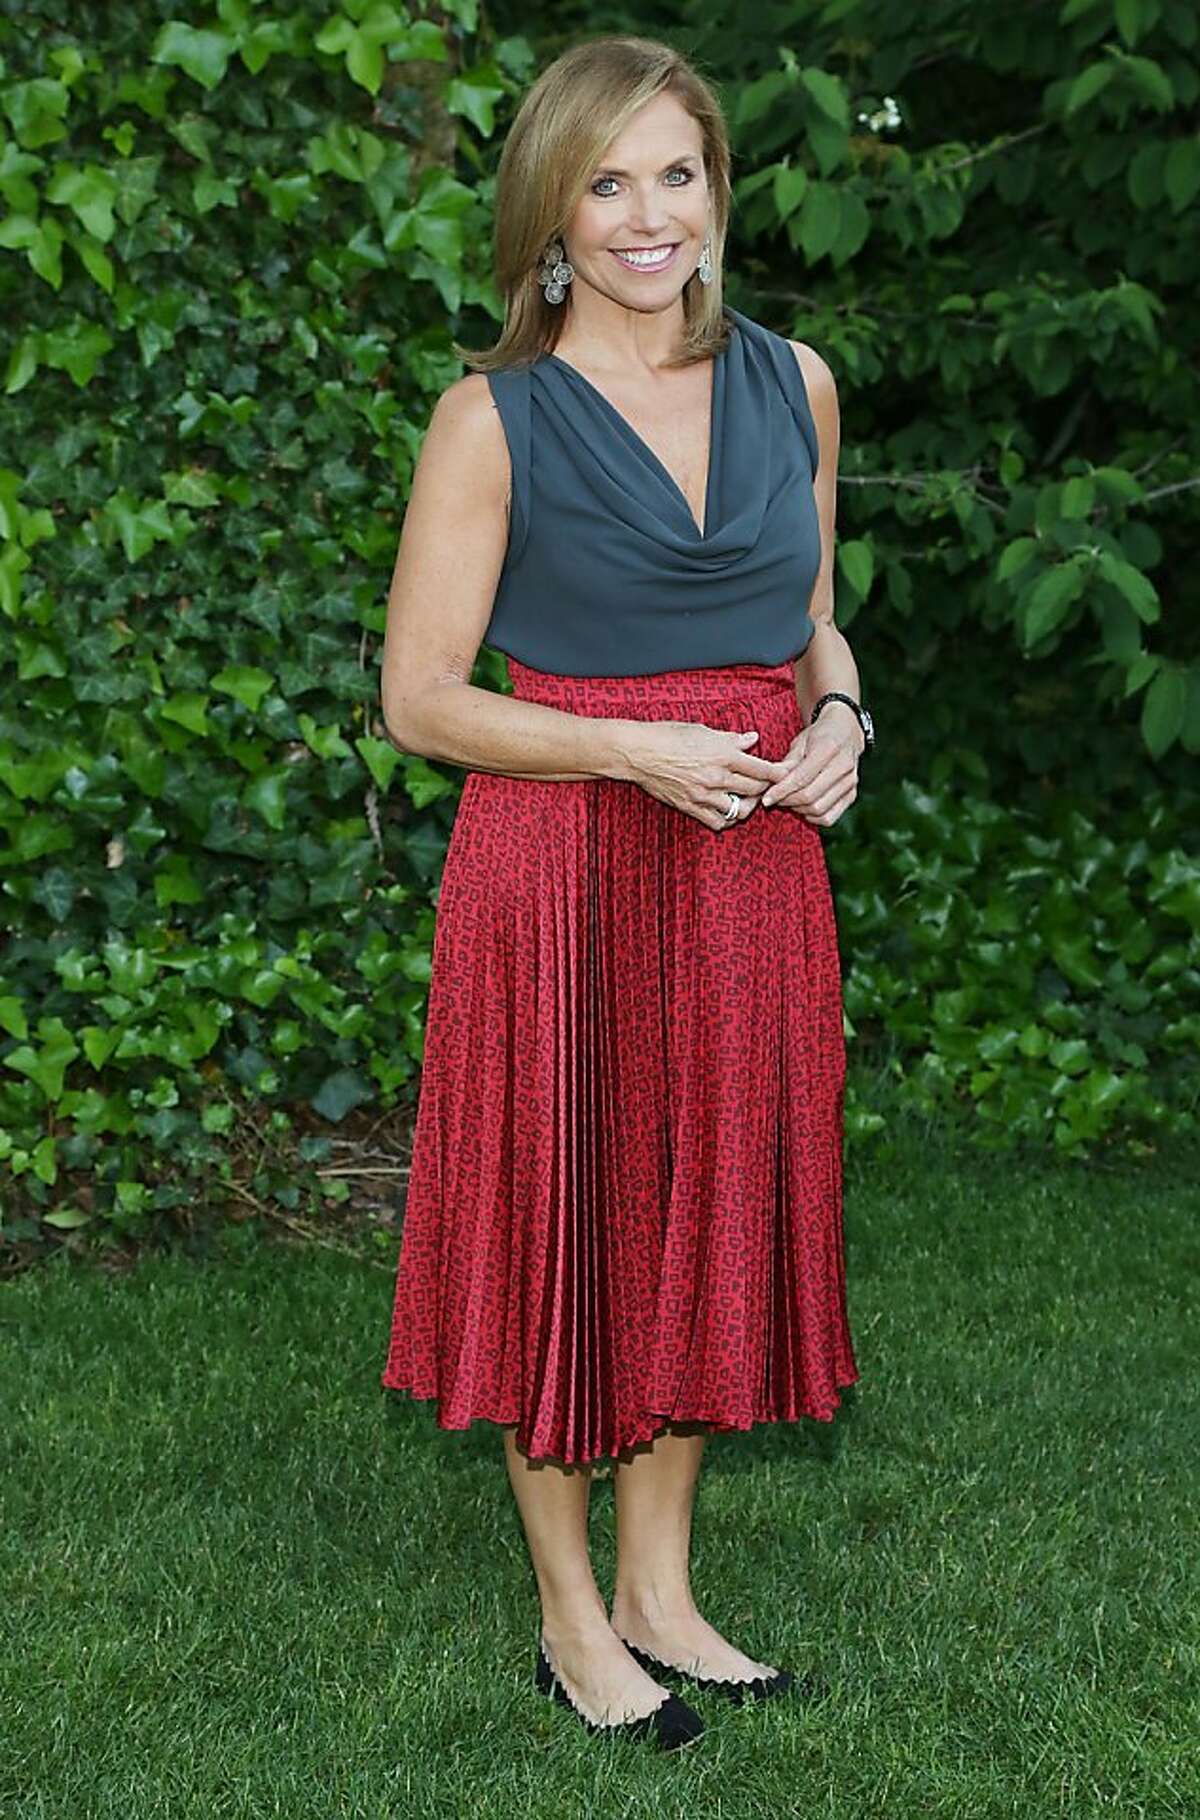 FILE - NOVEMBER 25, 2013: It was reported that Katie Couric will anchor a news program for Yahoo! November 25, 2013 NEW YORK, NY - MAY 30: Katie Couric attends The Bette Midler NYRP 18th Annual Spring Picnic at Gracie Mansion on May 30, 2013 in New York City. (Photo by Rob Kim/Getty Images)